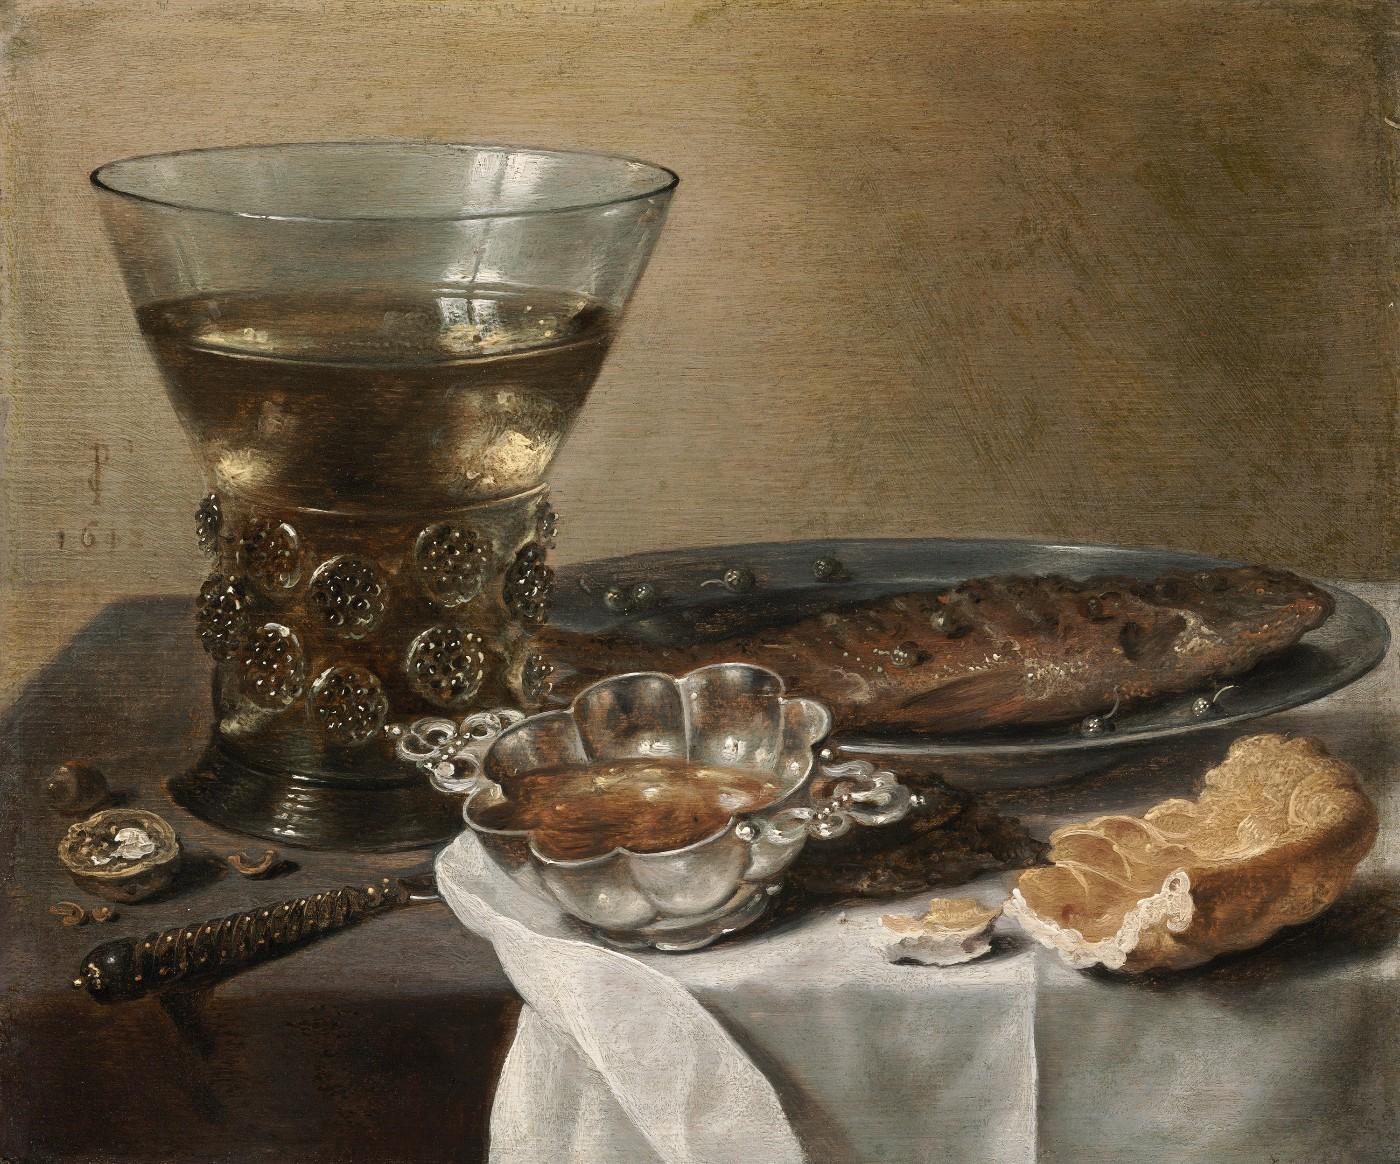 Pieter Claesz (Dutch, about 1597–1660), Still Life with Silver Brandy Bowl, Wine Glass, Herring, and Bread, 1642